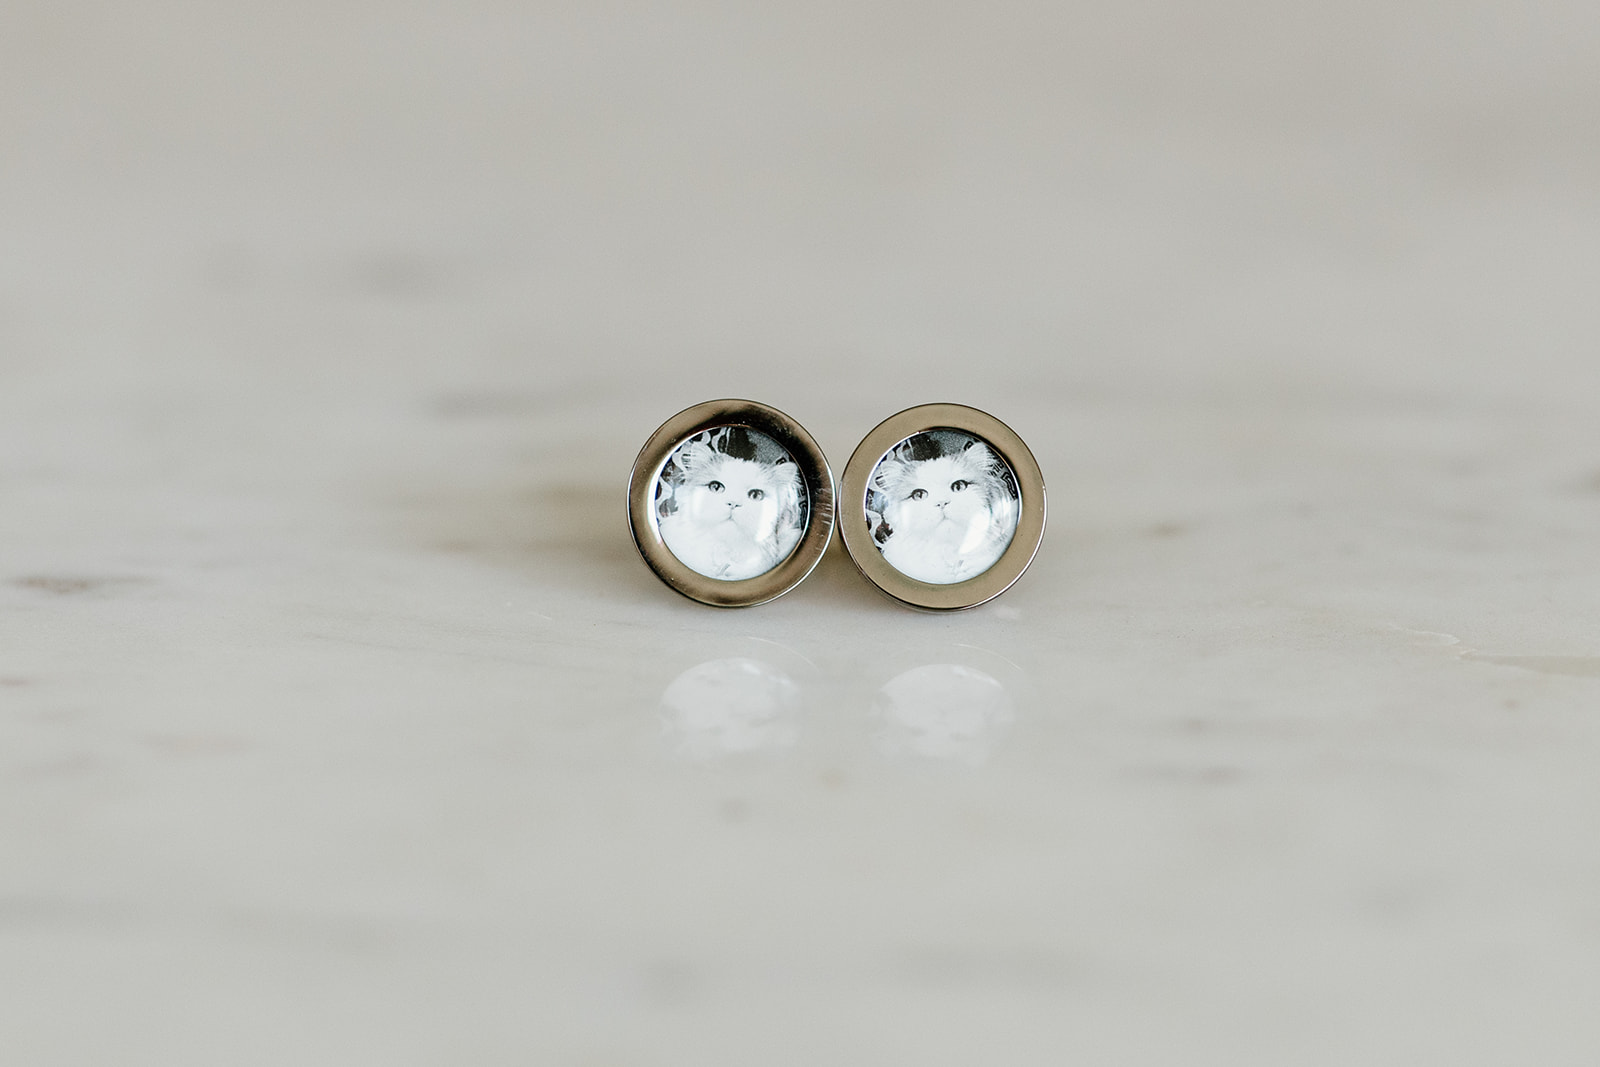 Custom cuff links with cats